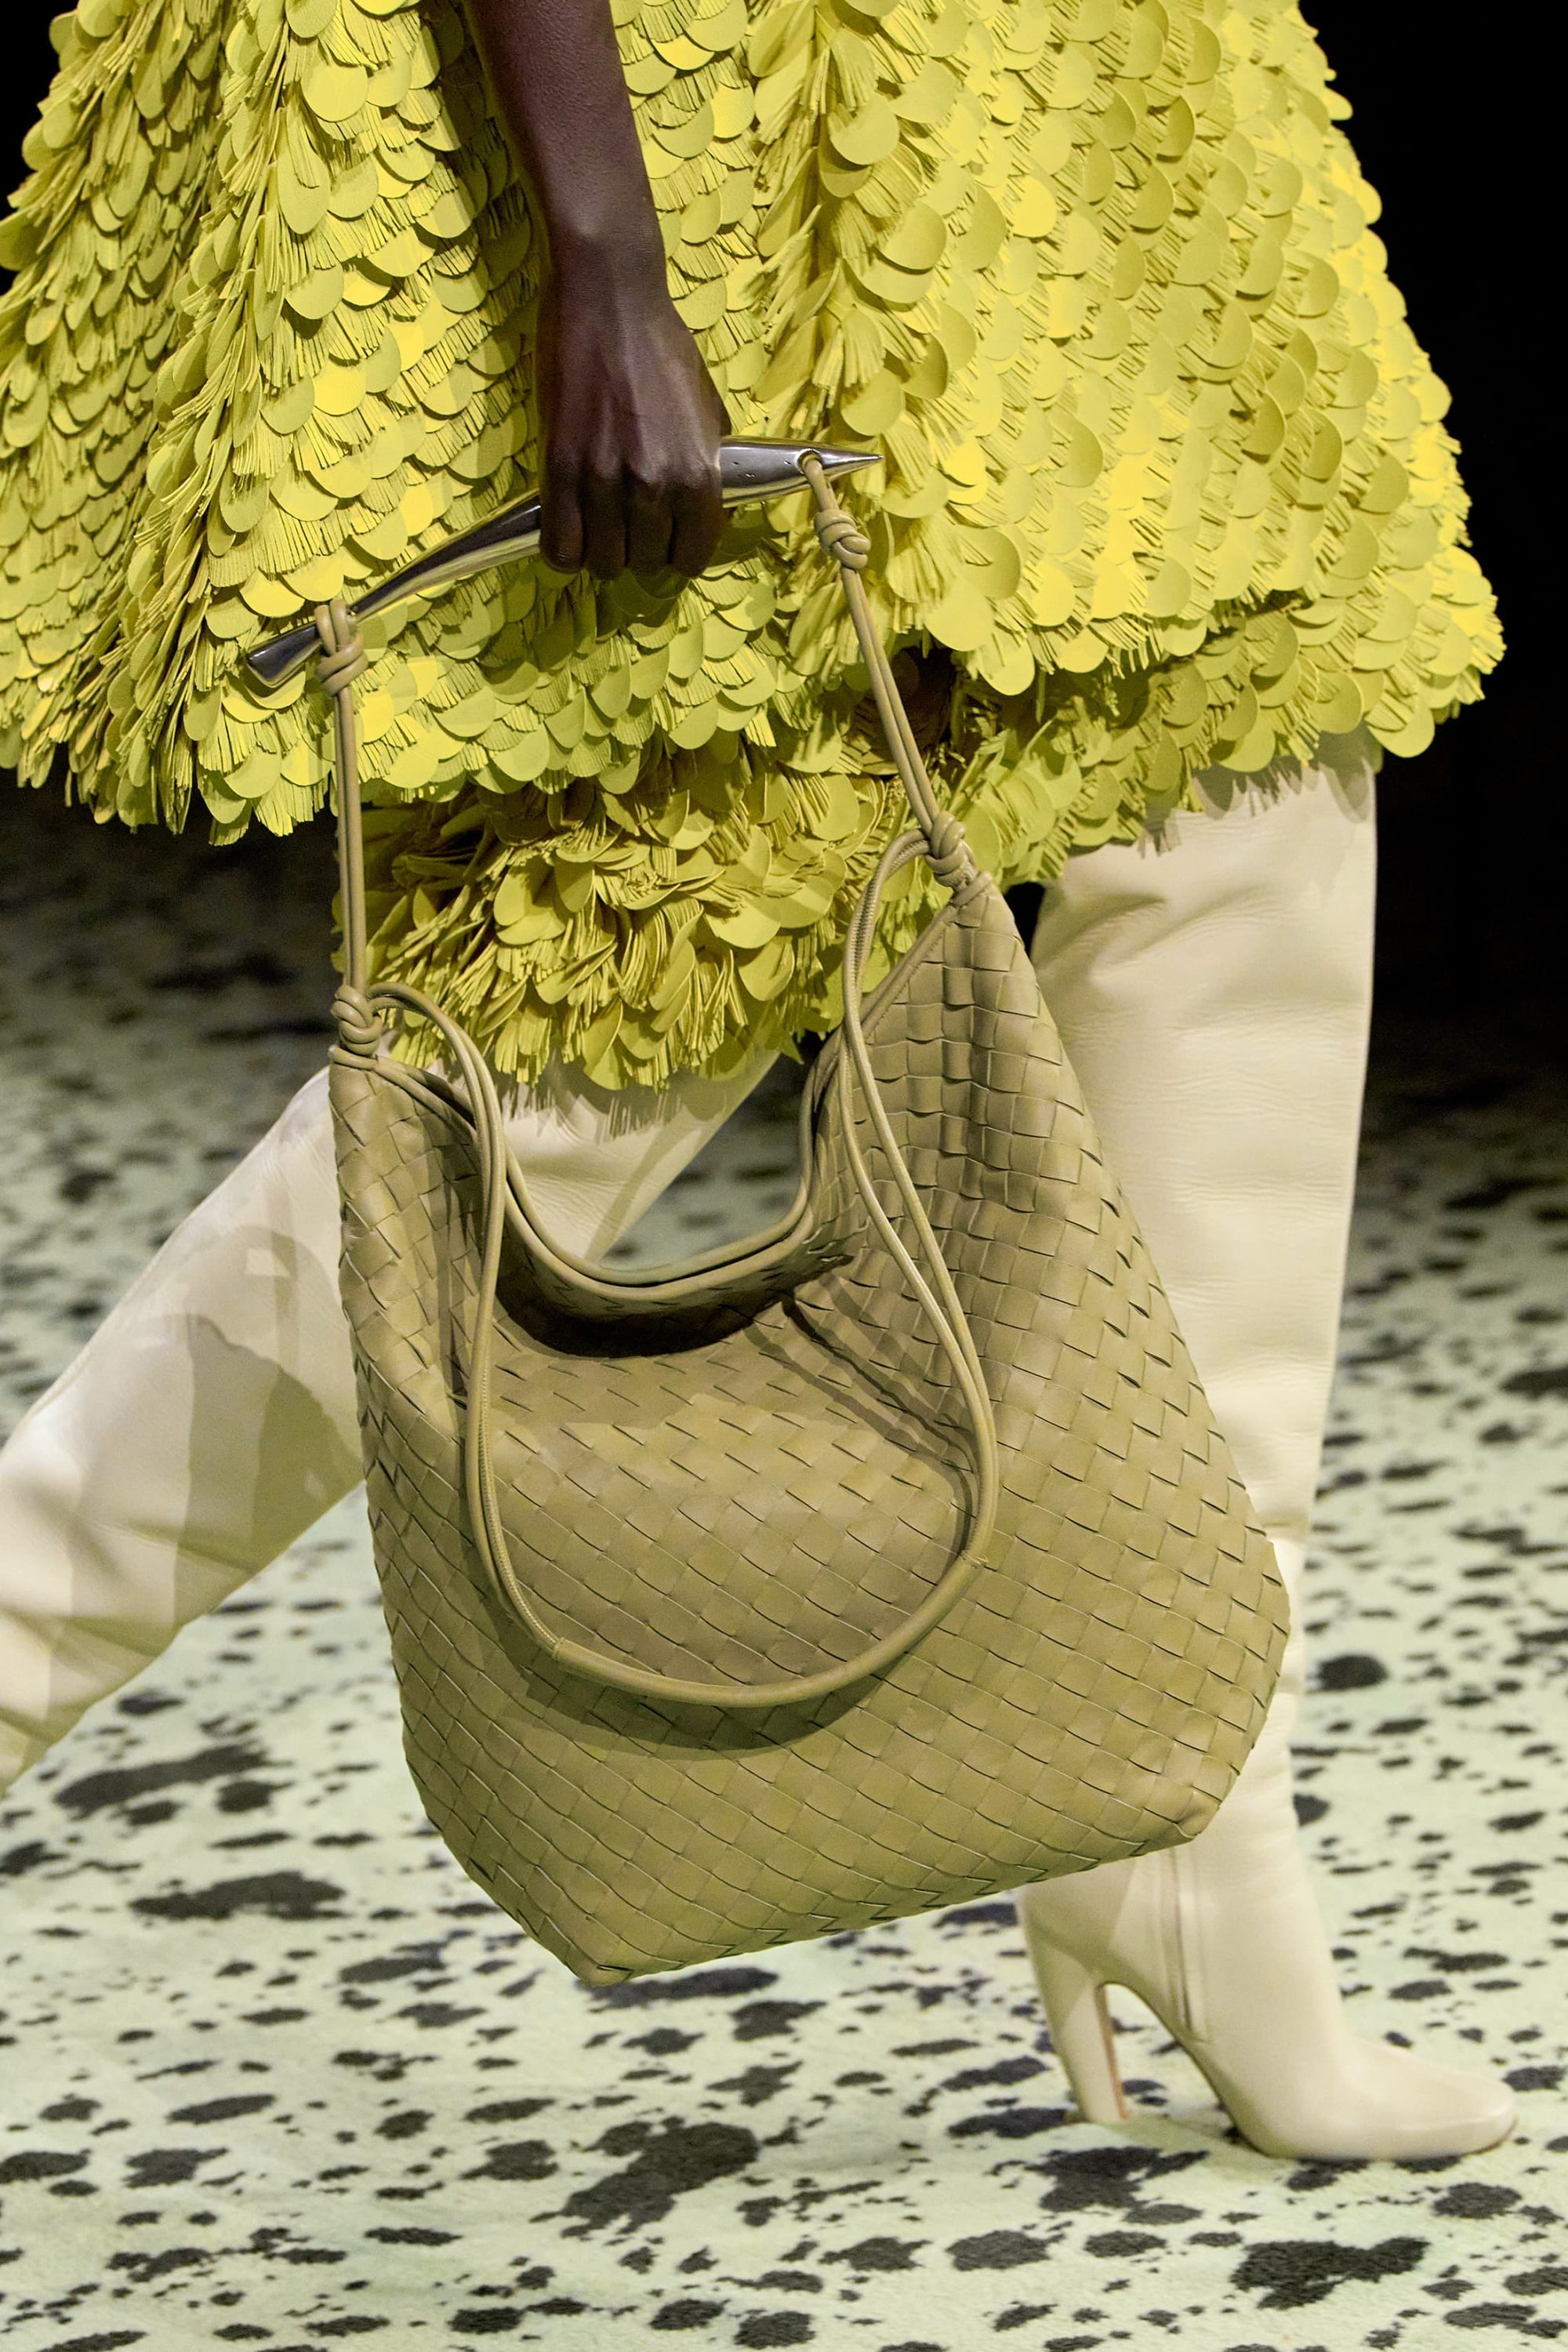 Oversized Bags Fall 2023 Accesory Trend | The Impression